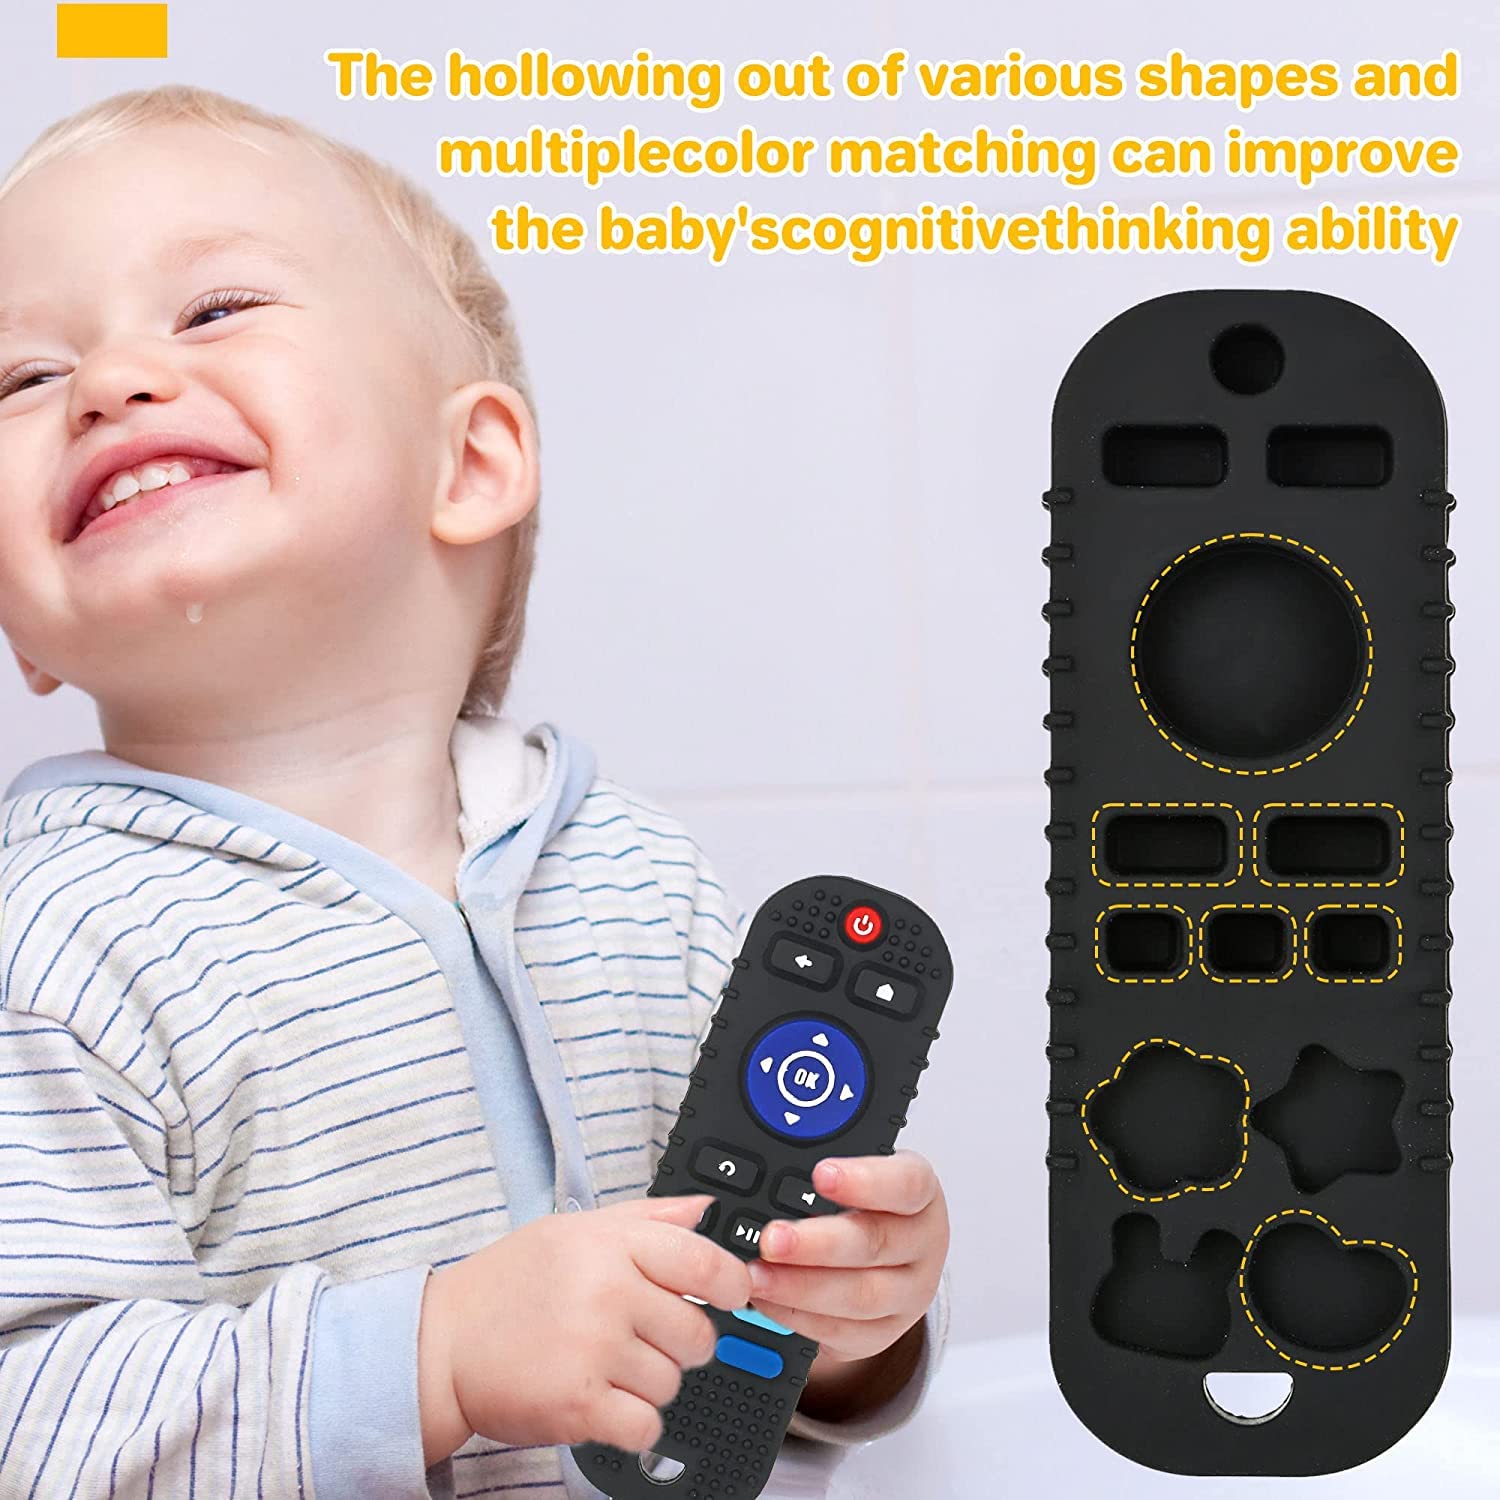 Silicone Baby Teething Toys,BPA Free TV Remote Control Shape Teething Toys for Babies 6-12 Months Baby Chew Toys for Toddlers,Baby Teethers Relief Soothe Babies Gums(black)